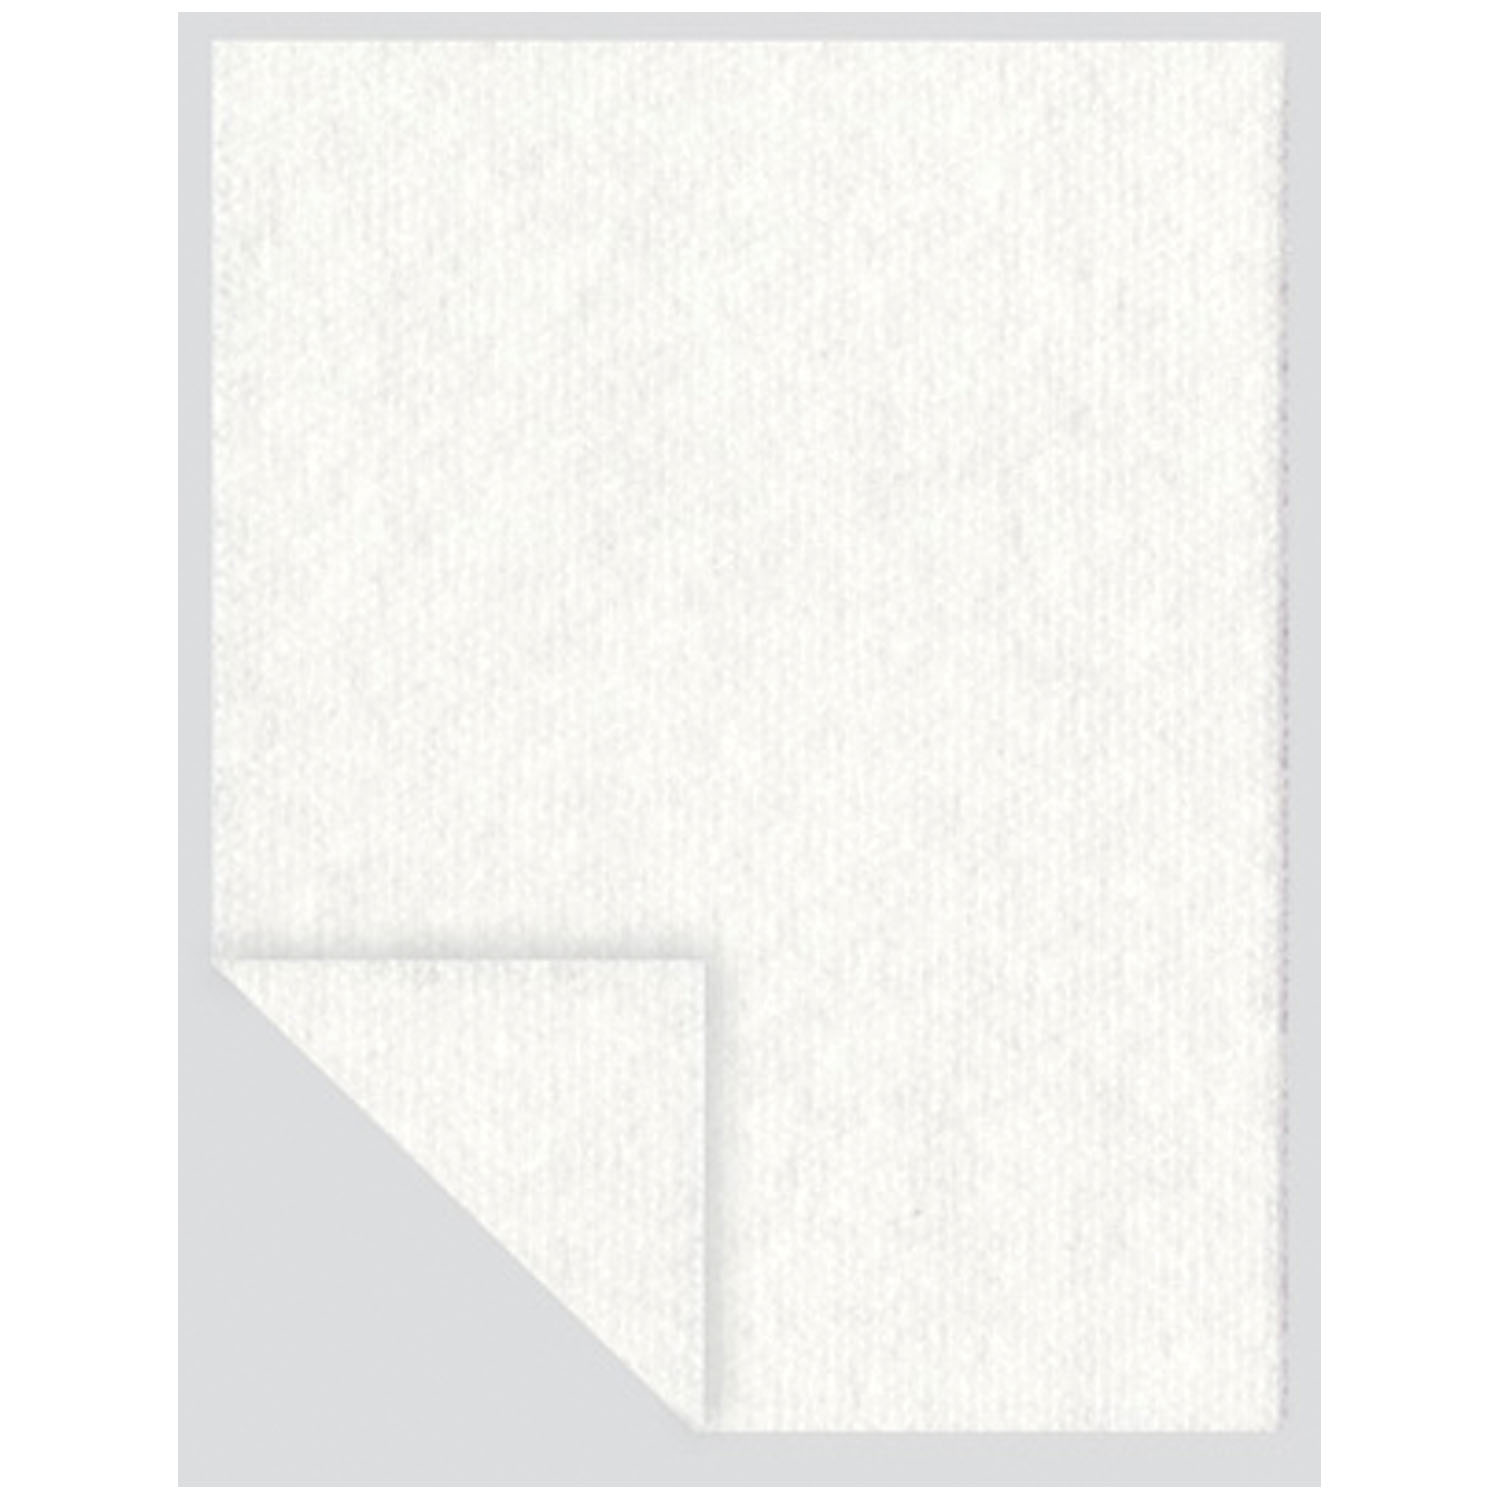 DUKAL NON-ADHERENT PAD WITH ADHESIVE : 7665033 BX $9.75 Stocked